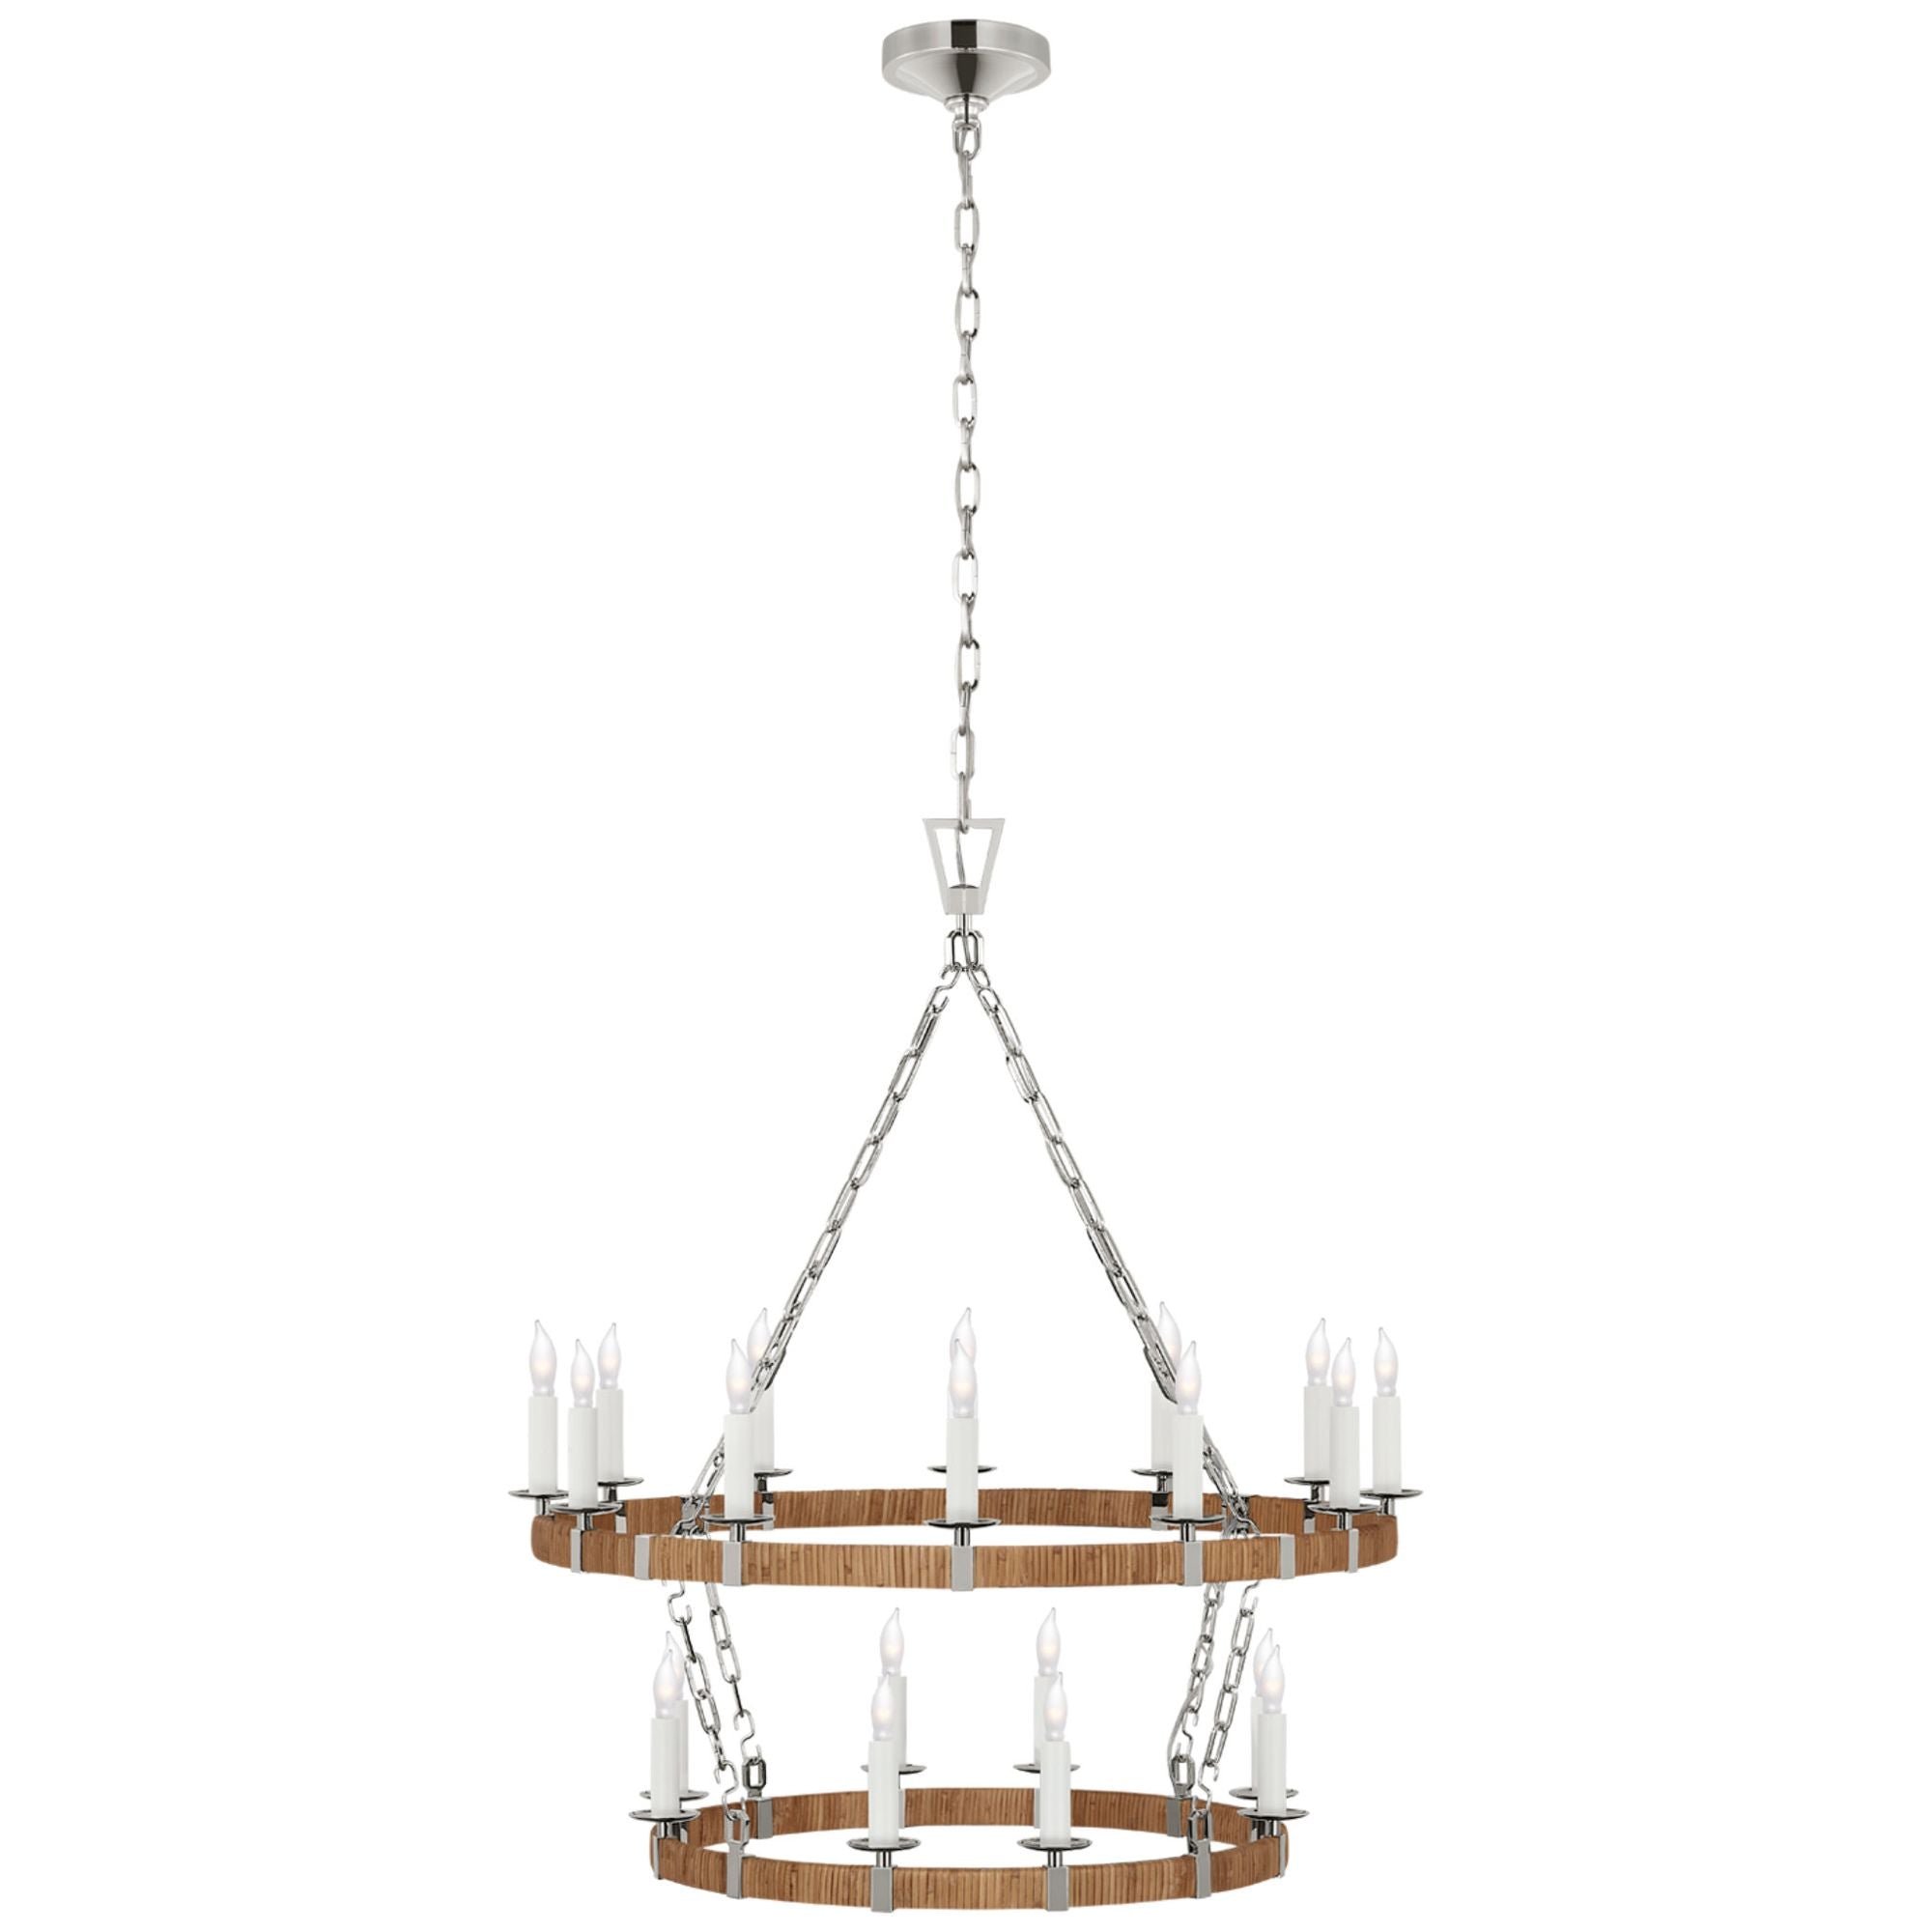 Chapman & Myers Darlana Medium Two Tier Chandelier in Polished Nickel and Natural Rattan